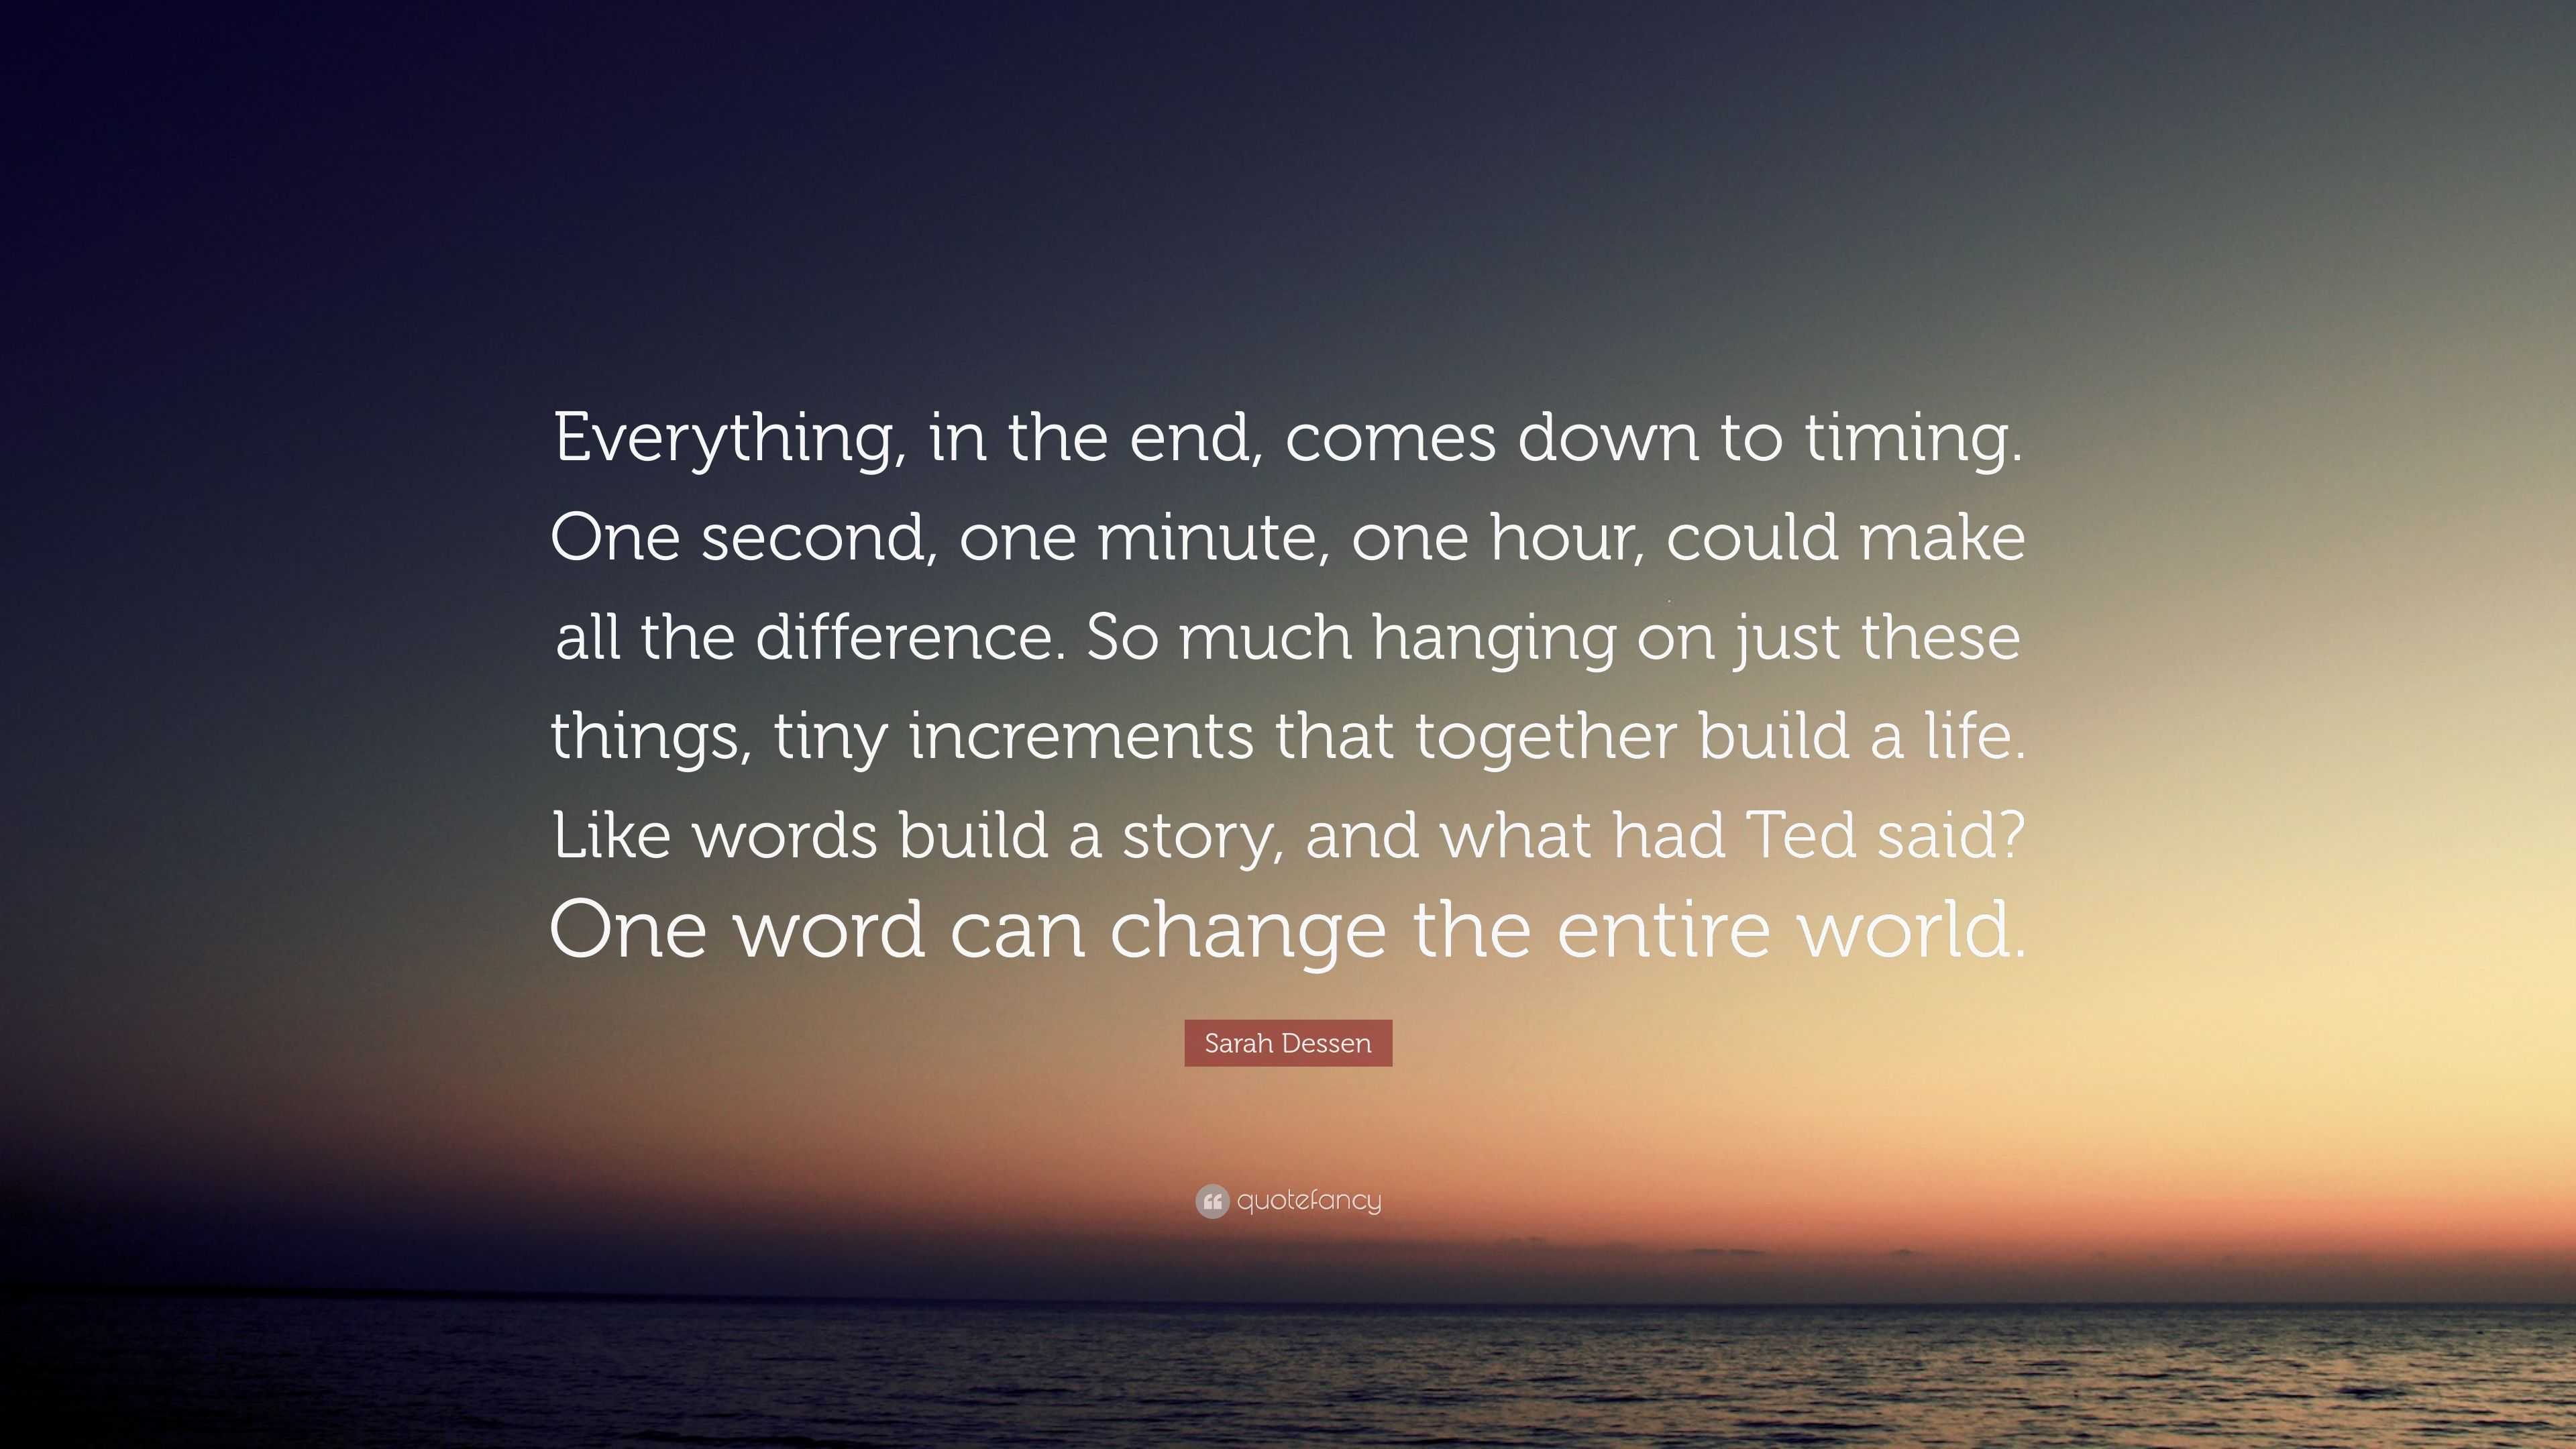 Sarah Dessen Quote “Everything in the end es down to timing